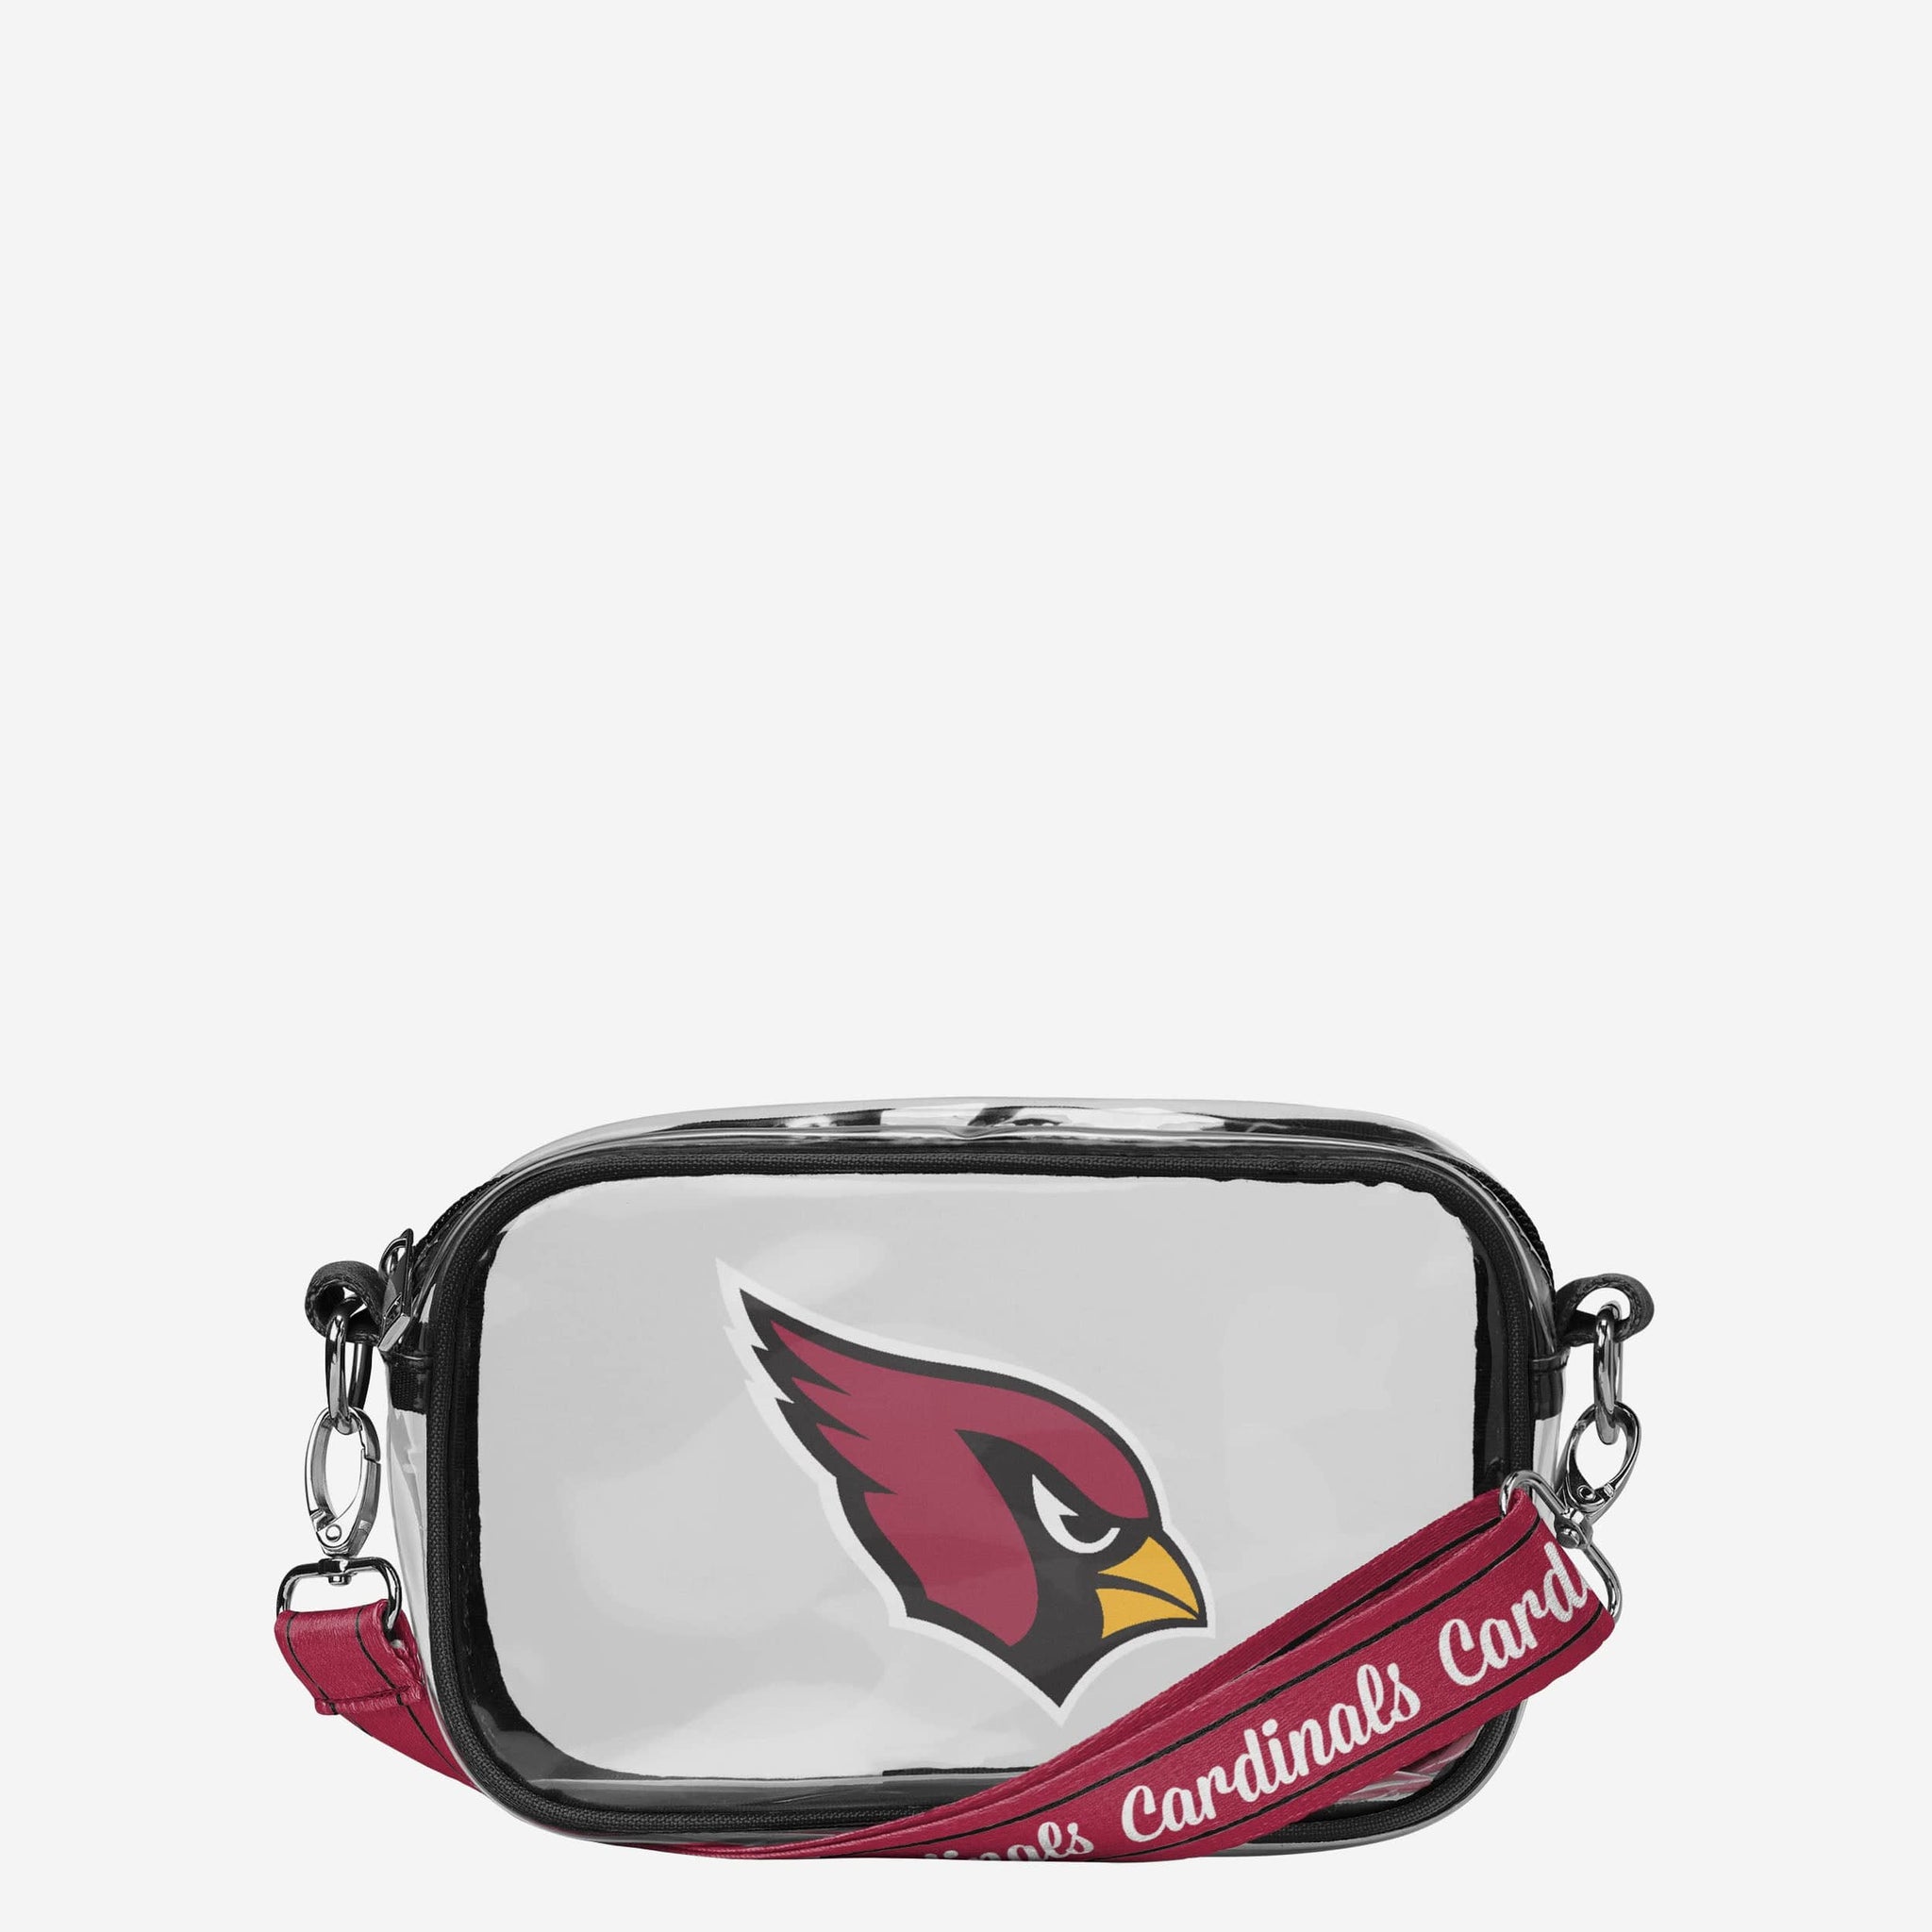 St. Louis Cardinals Team Jersey Tote - Bags & Wallets